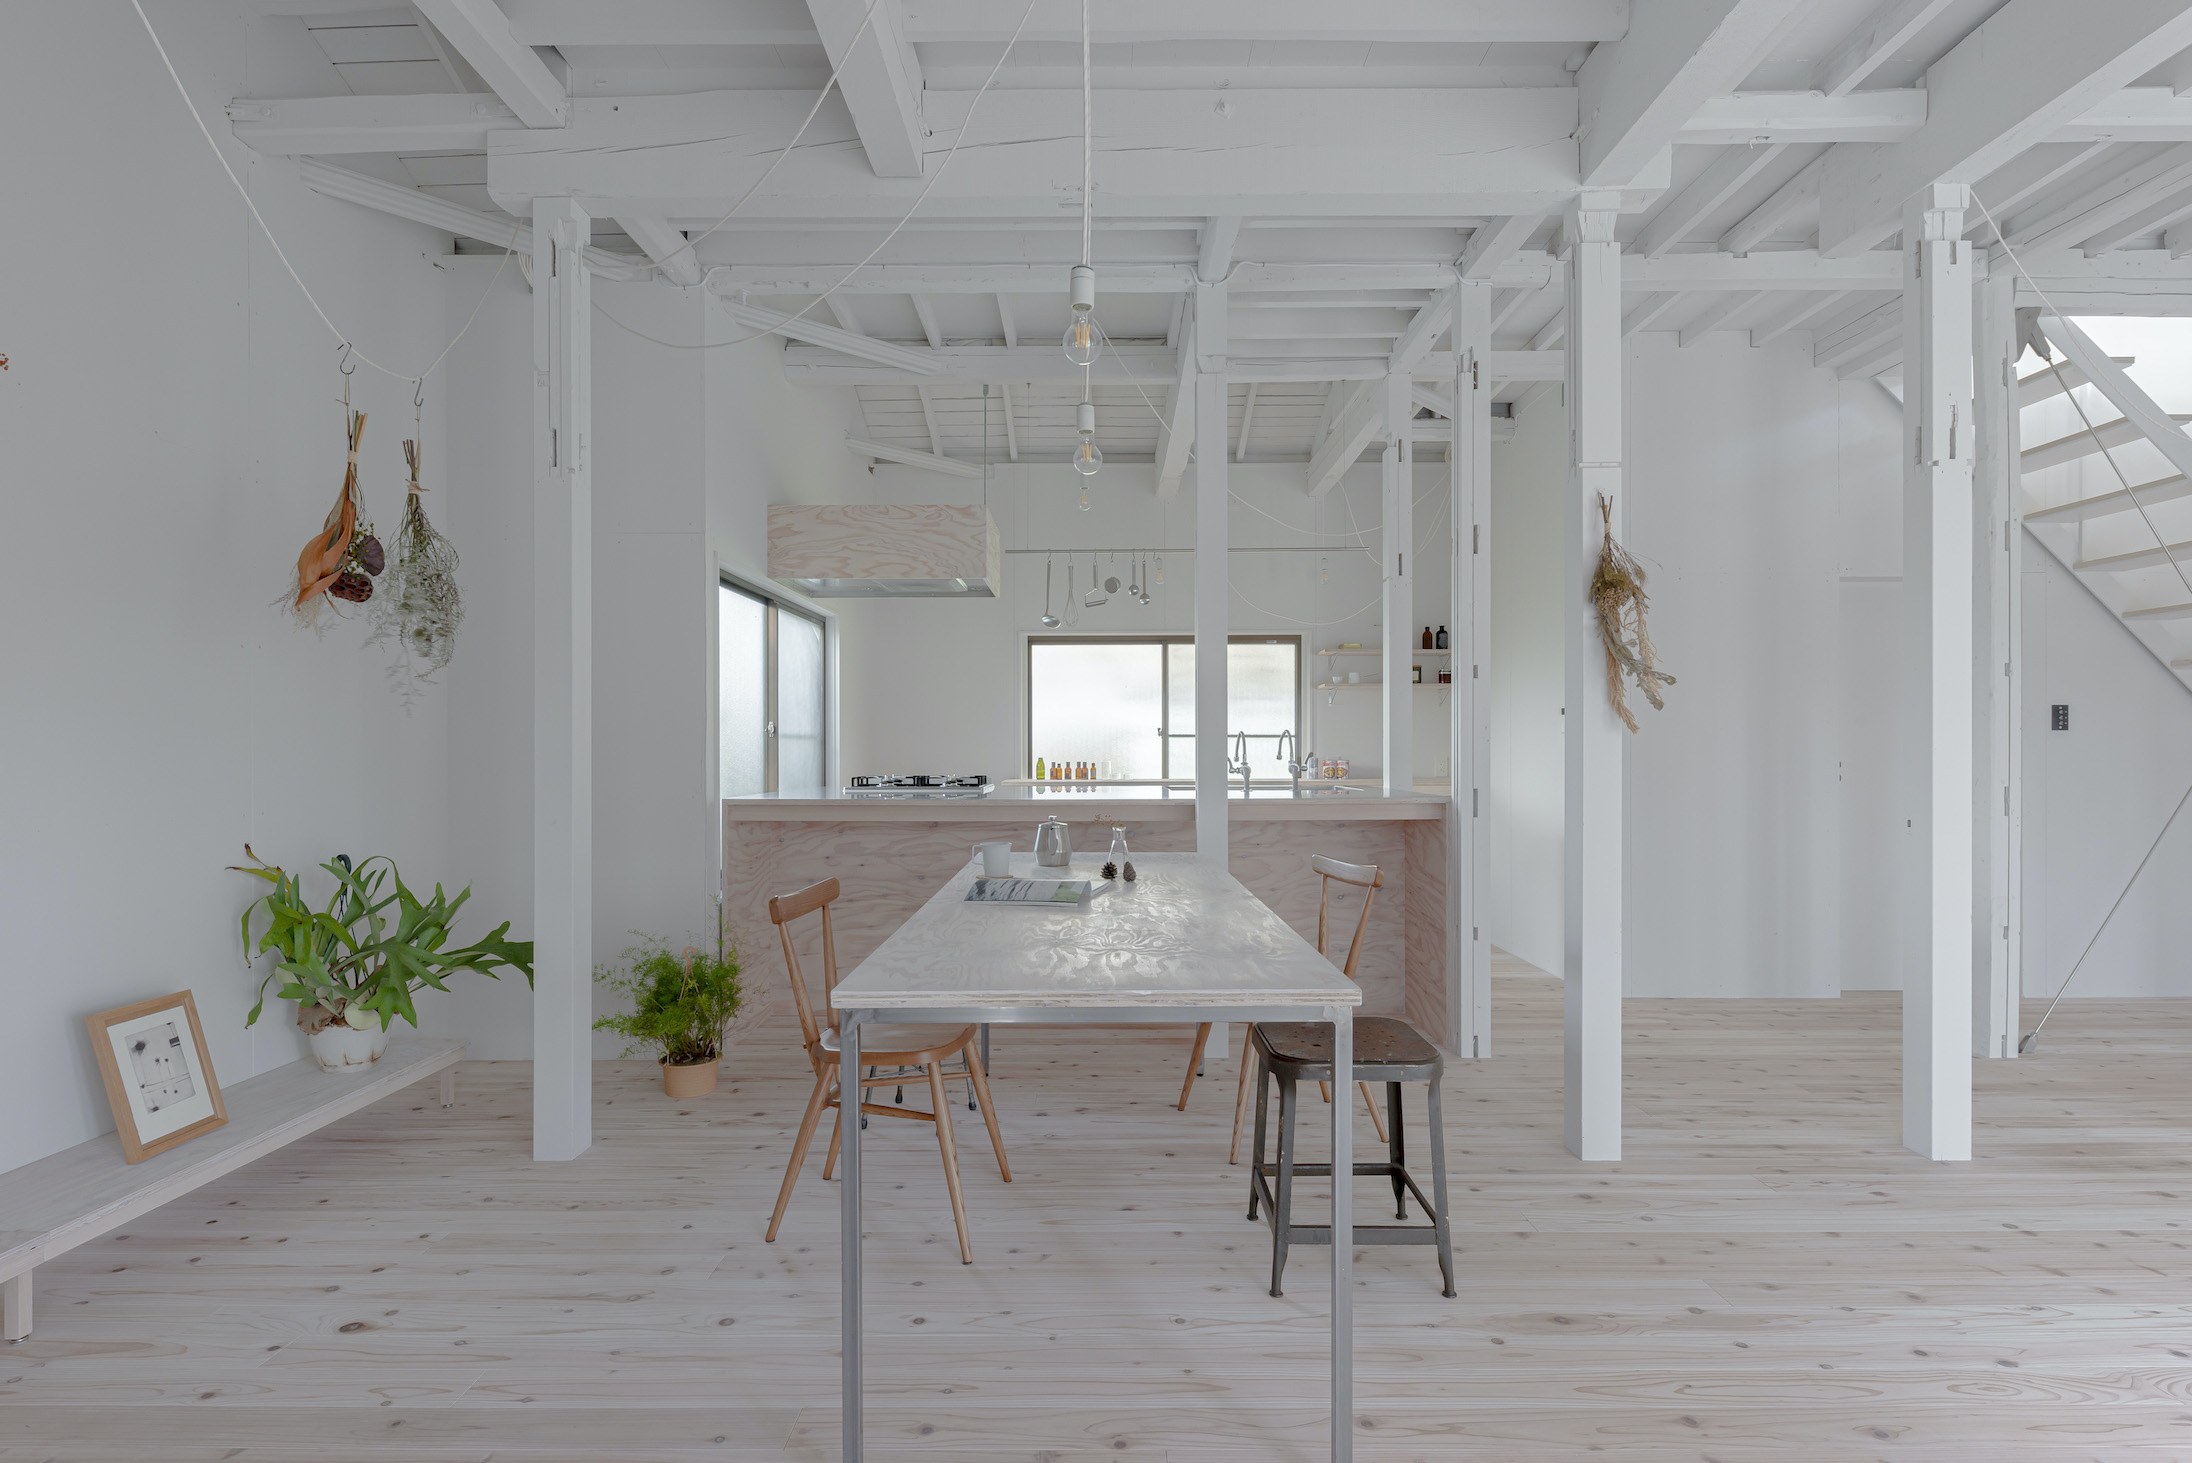 the architects designed a steel framed table topped with the same larch plywood 11